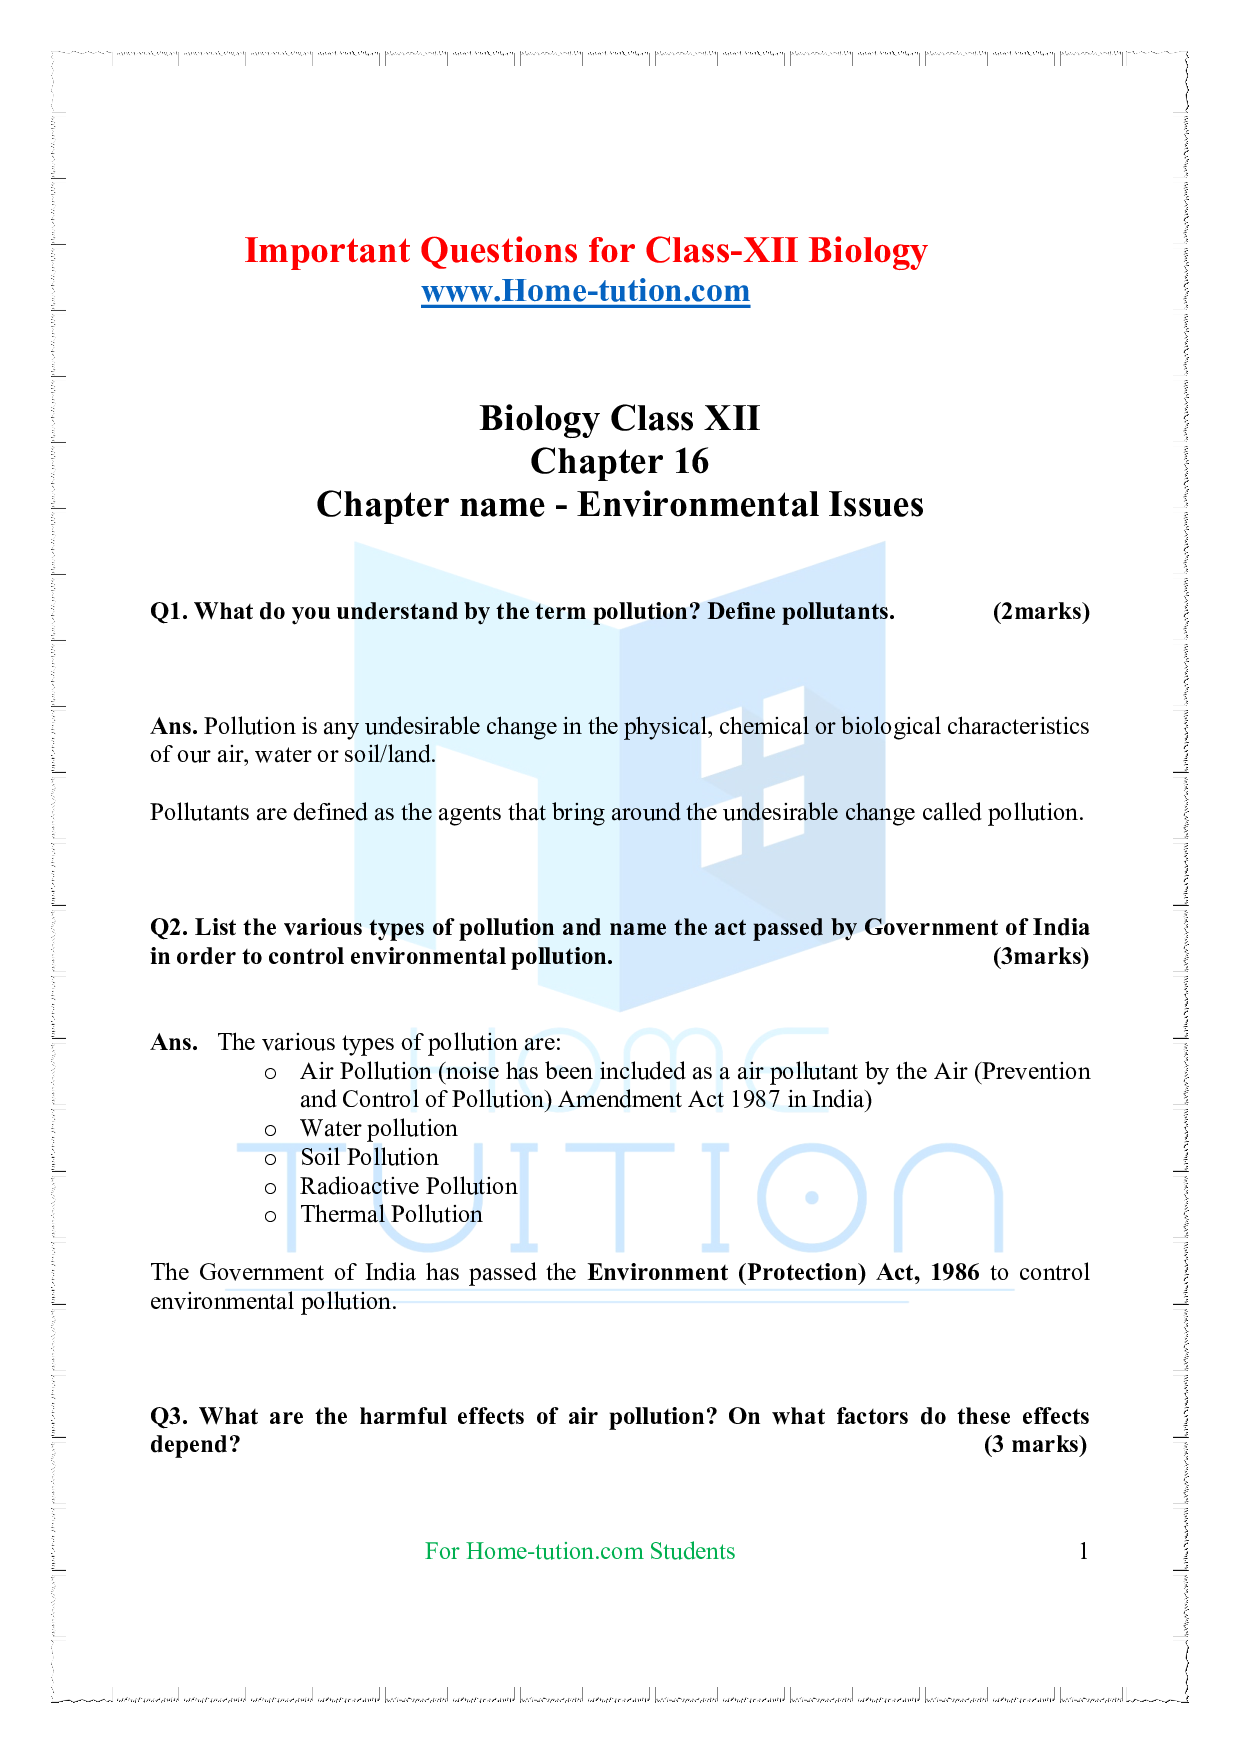 Chapter-16 Environmental Issues Questions